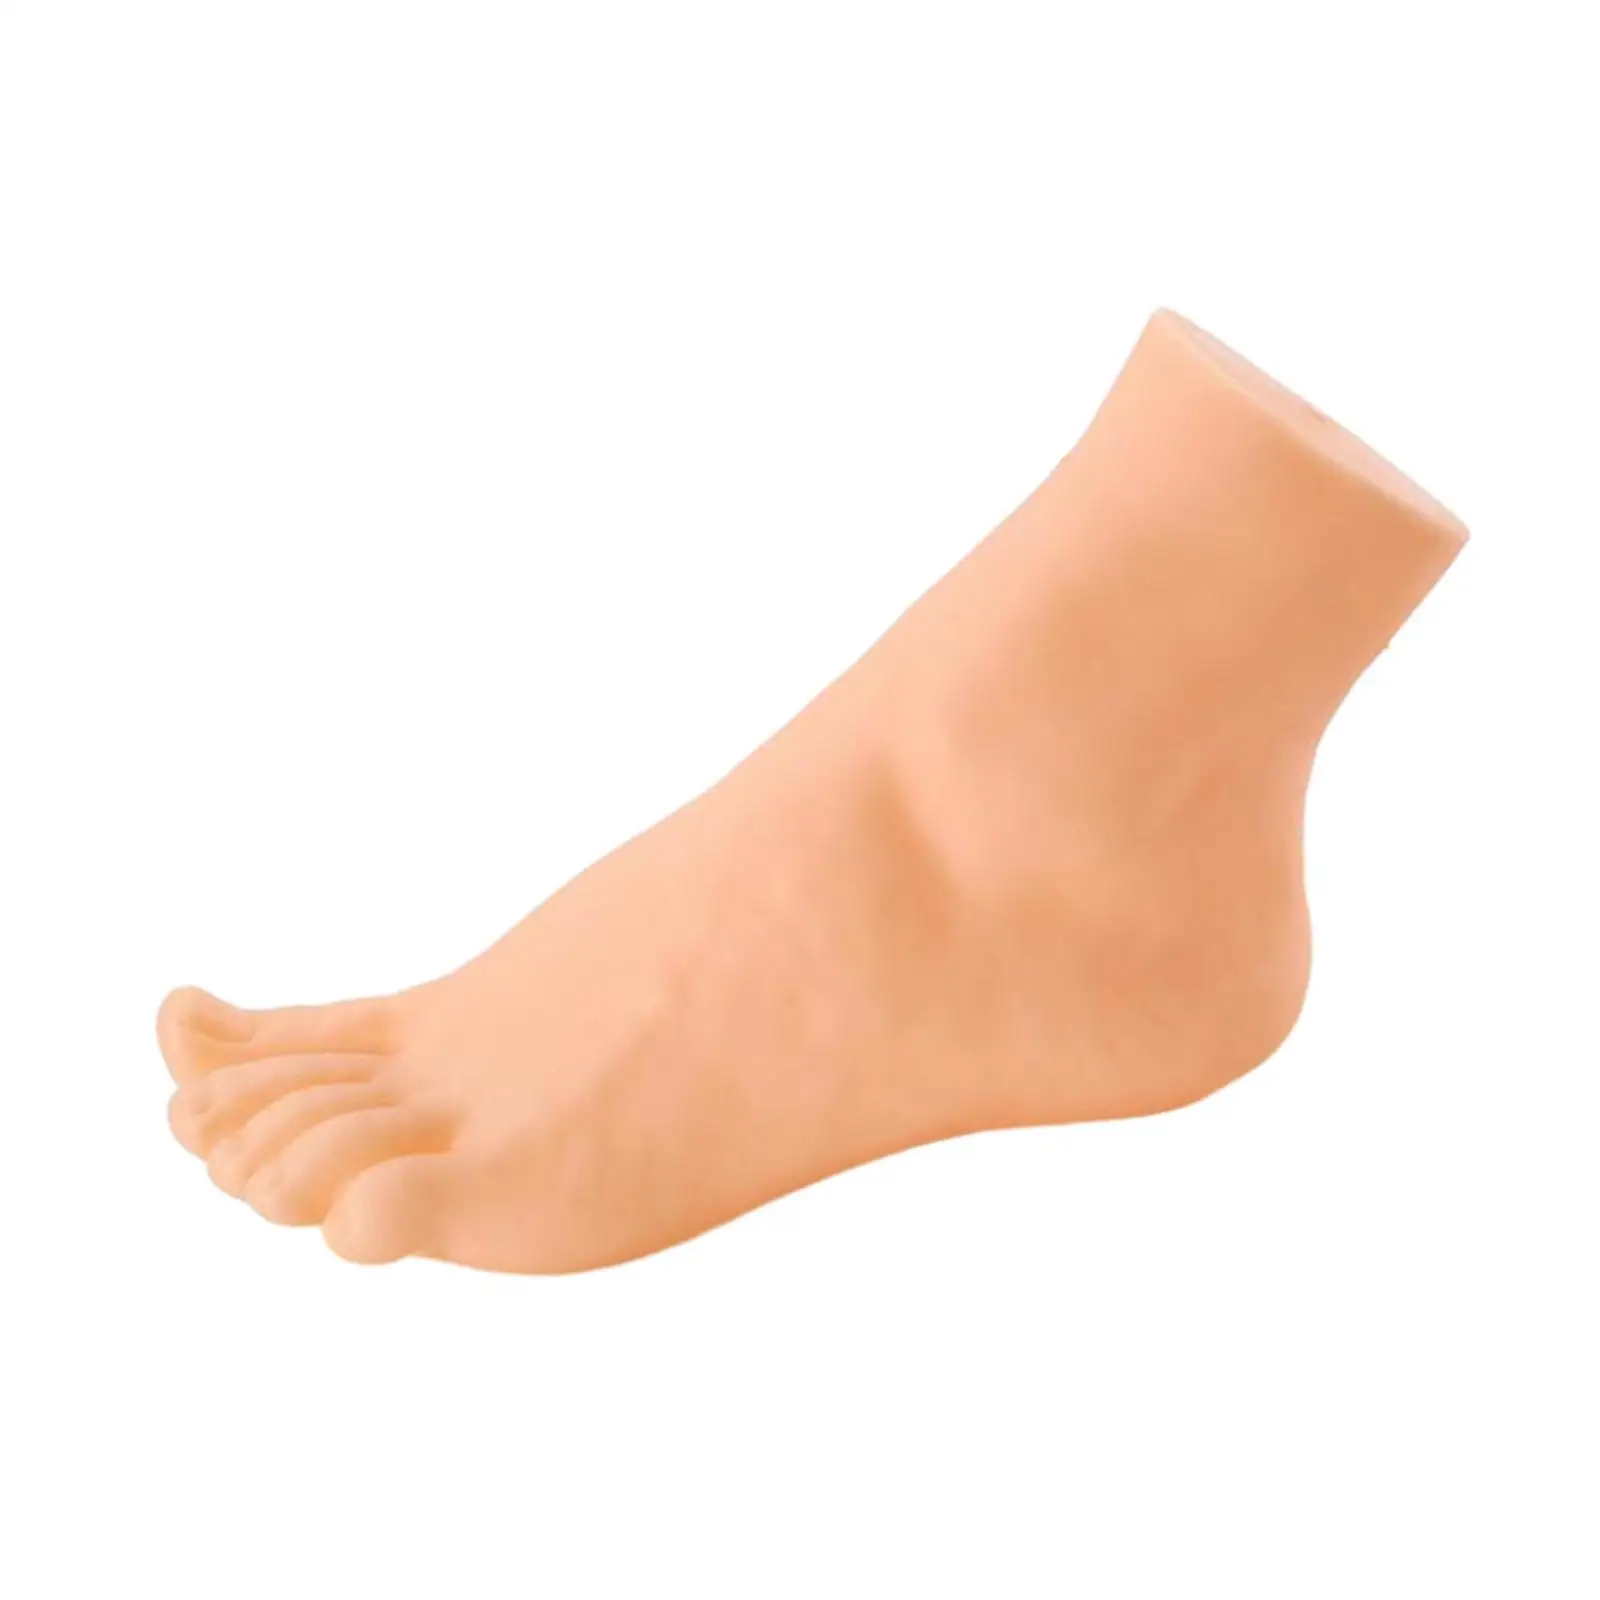 Mannequin Foot Display Lightweight Sock Display Prop Durable Foot Model Simulation for Shop Retail Jewelry Short Stocking